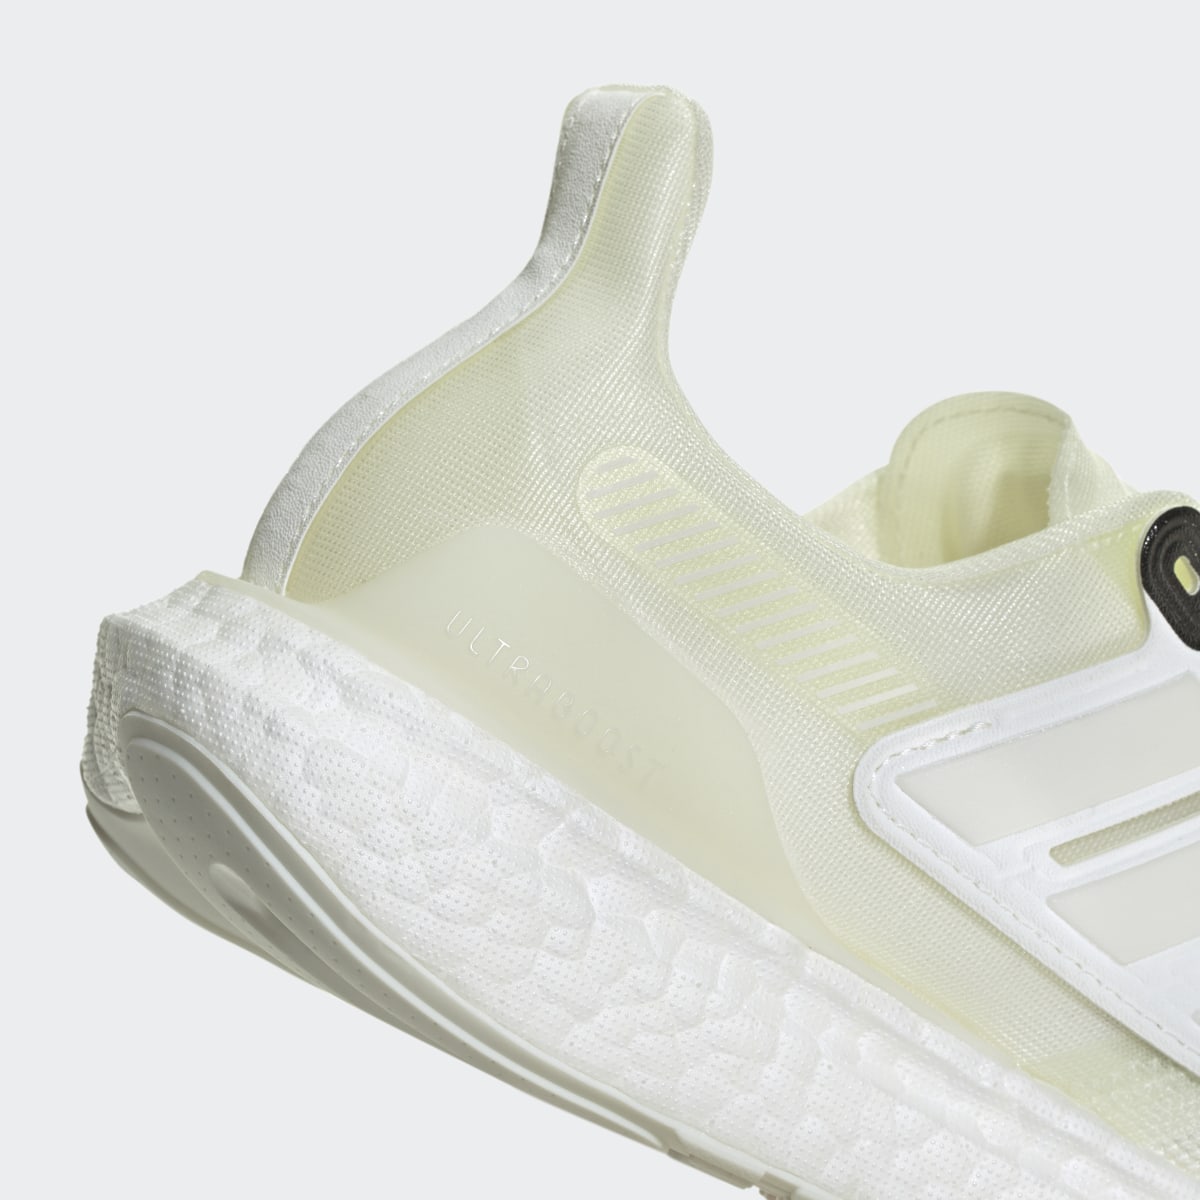 Adidas Chaussure Ultraboost Made to Be Remade 2.0. 4